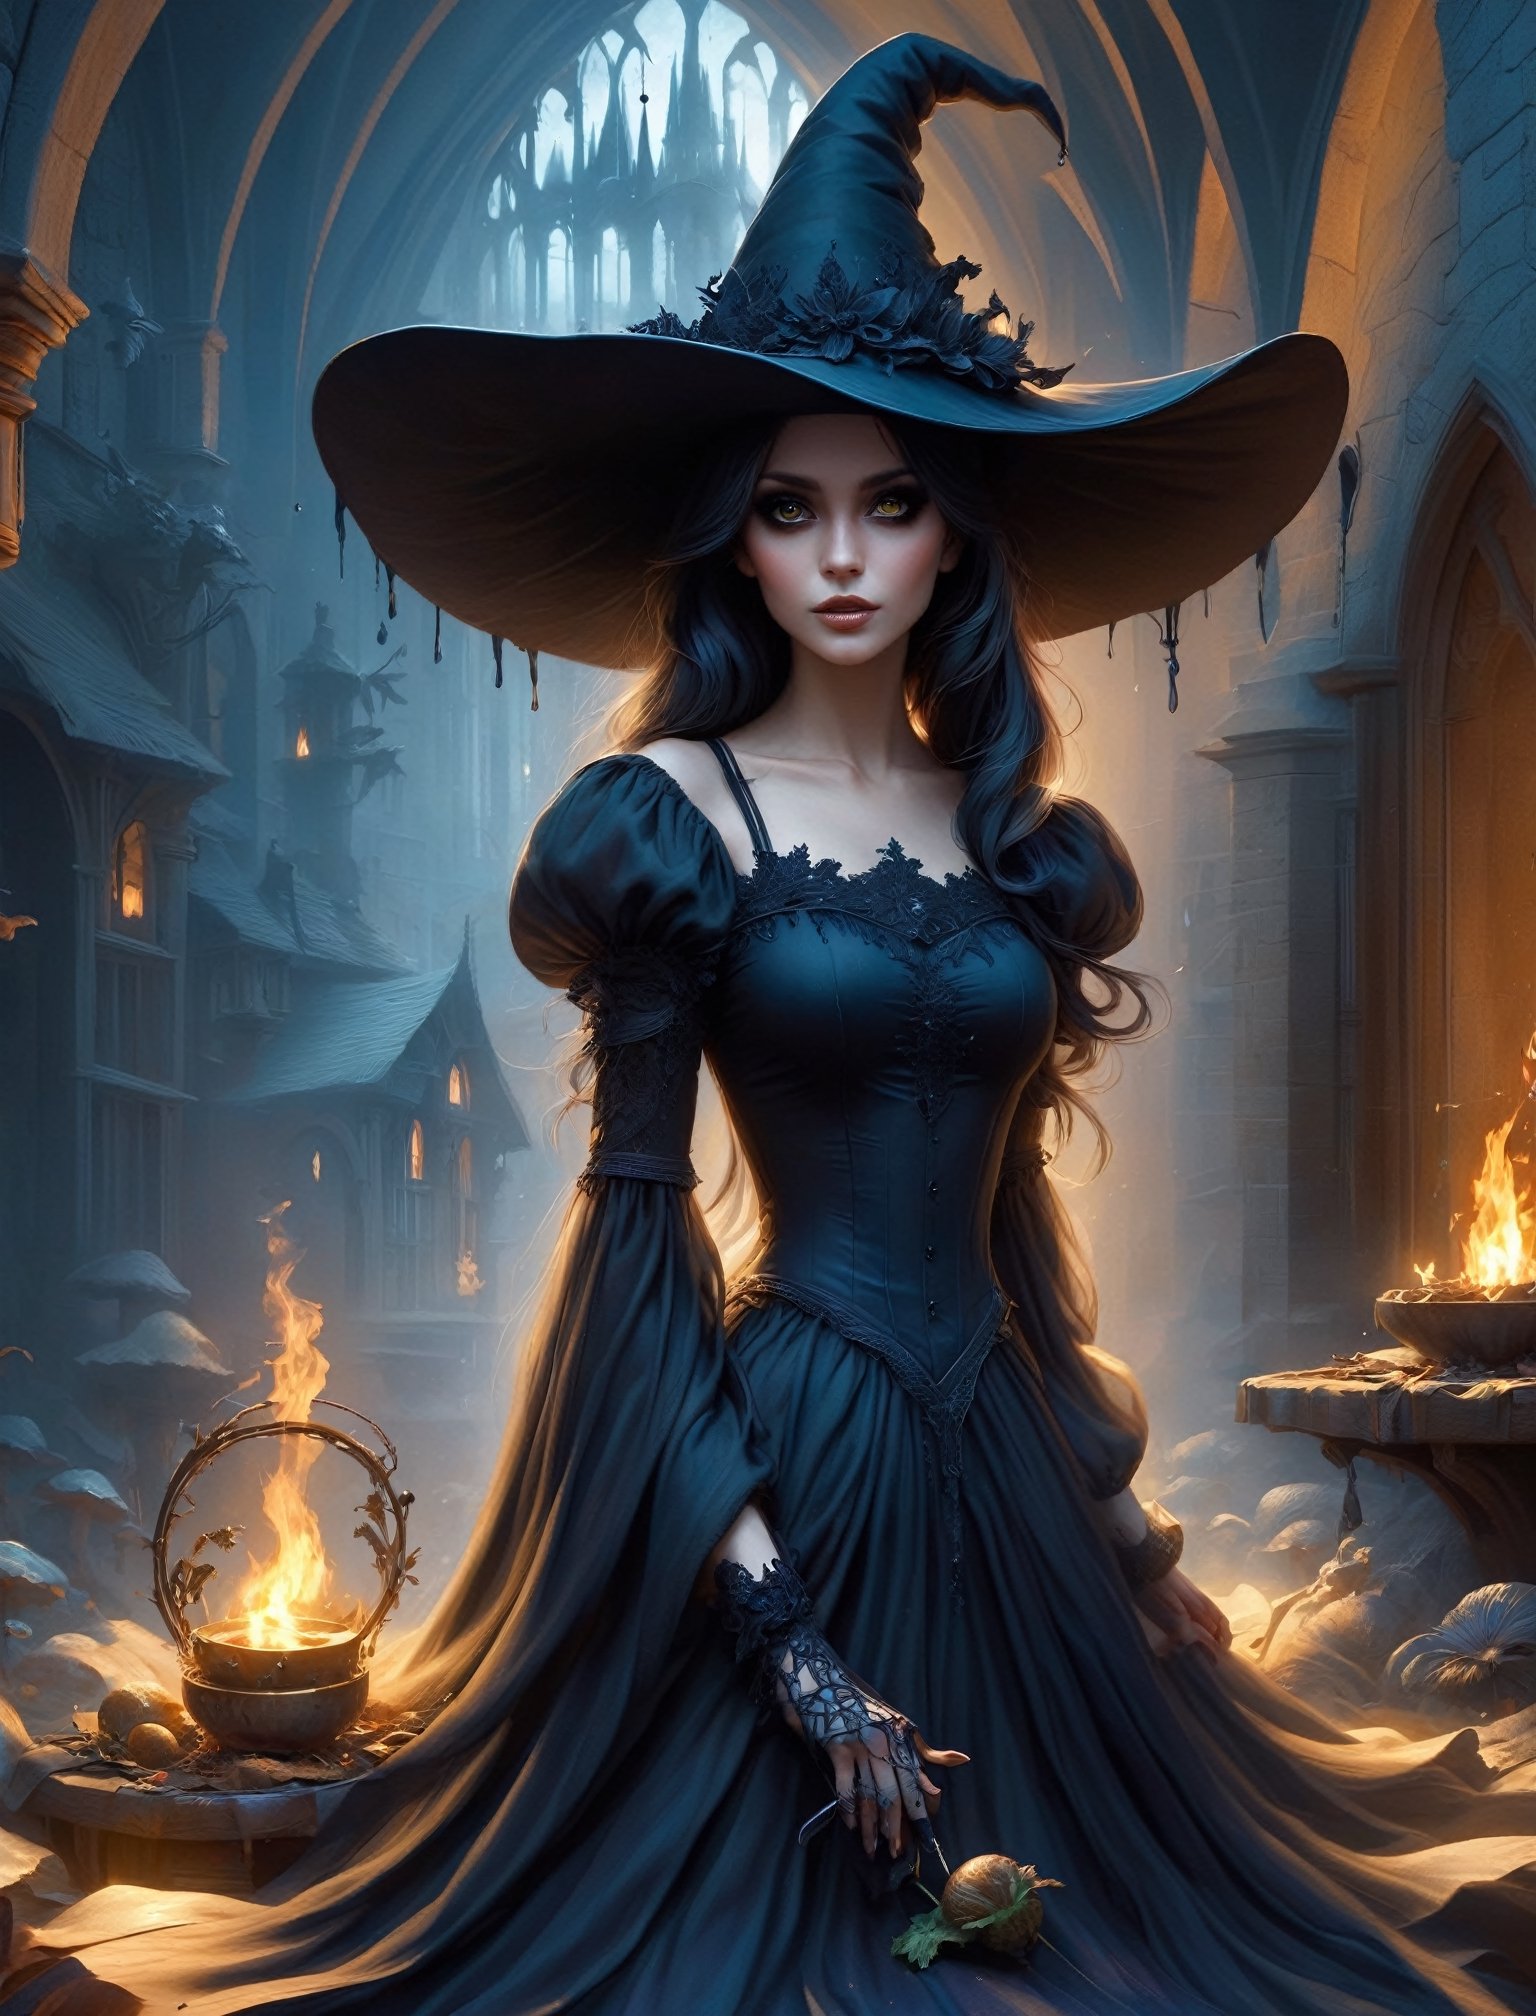 "A mysterious witch stands outside a dark gothic cathedral, the crumbling stone edifice adding to the eerie atmosphere. This scene evokes a cinematic quality, with dramatic lighting highlighting the witch's haunting presence. In the expertly crafted painting, the witch's tattered cloak billows in the wind, her piercing gaze suggesting hidden powers. The brim of her mushroom-inspired hat drips from self-deliquescence, The intricate details of the cathedral's architecture are meticulously rendered, enhancing the overall sense of decay and mystery. This captivating image skillfully combines elements of the supernatural and gothic, inviting viewers to unravel the secrets within its dark, atmospheric setting."